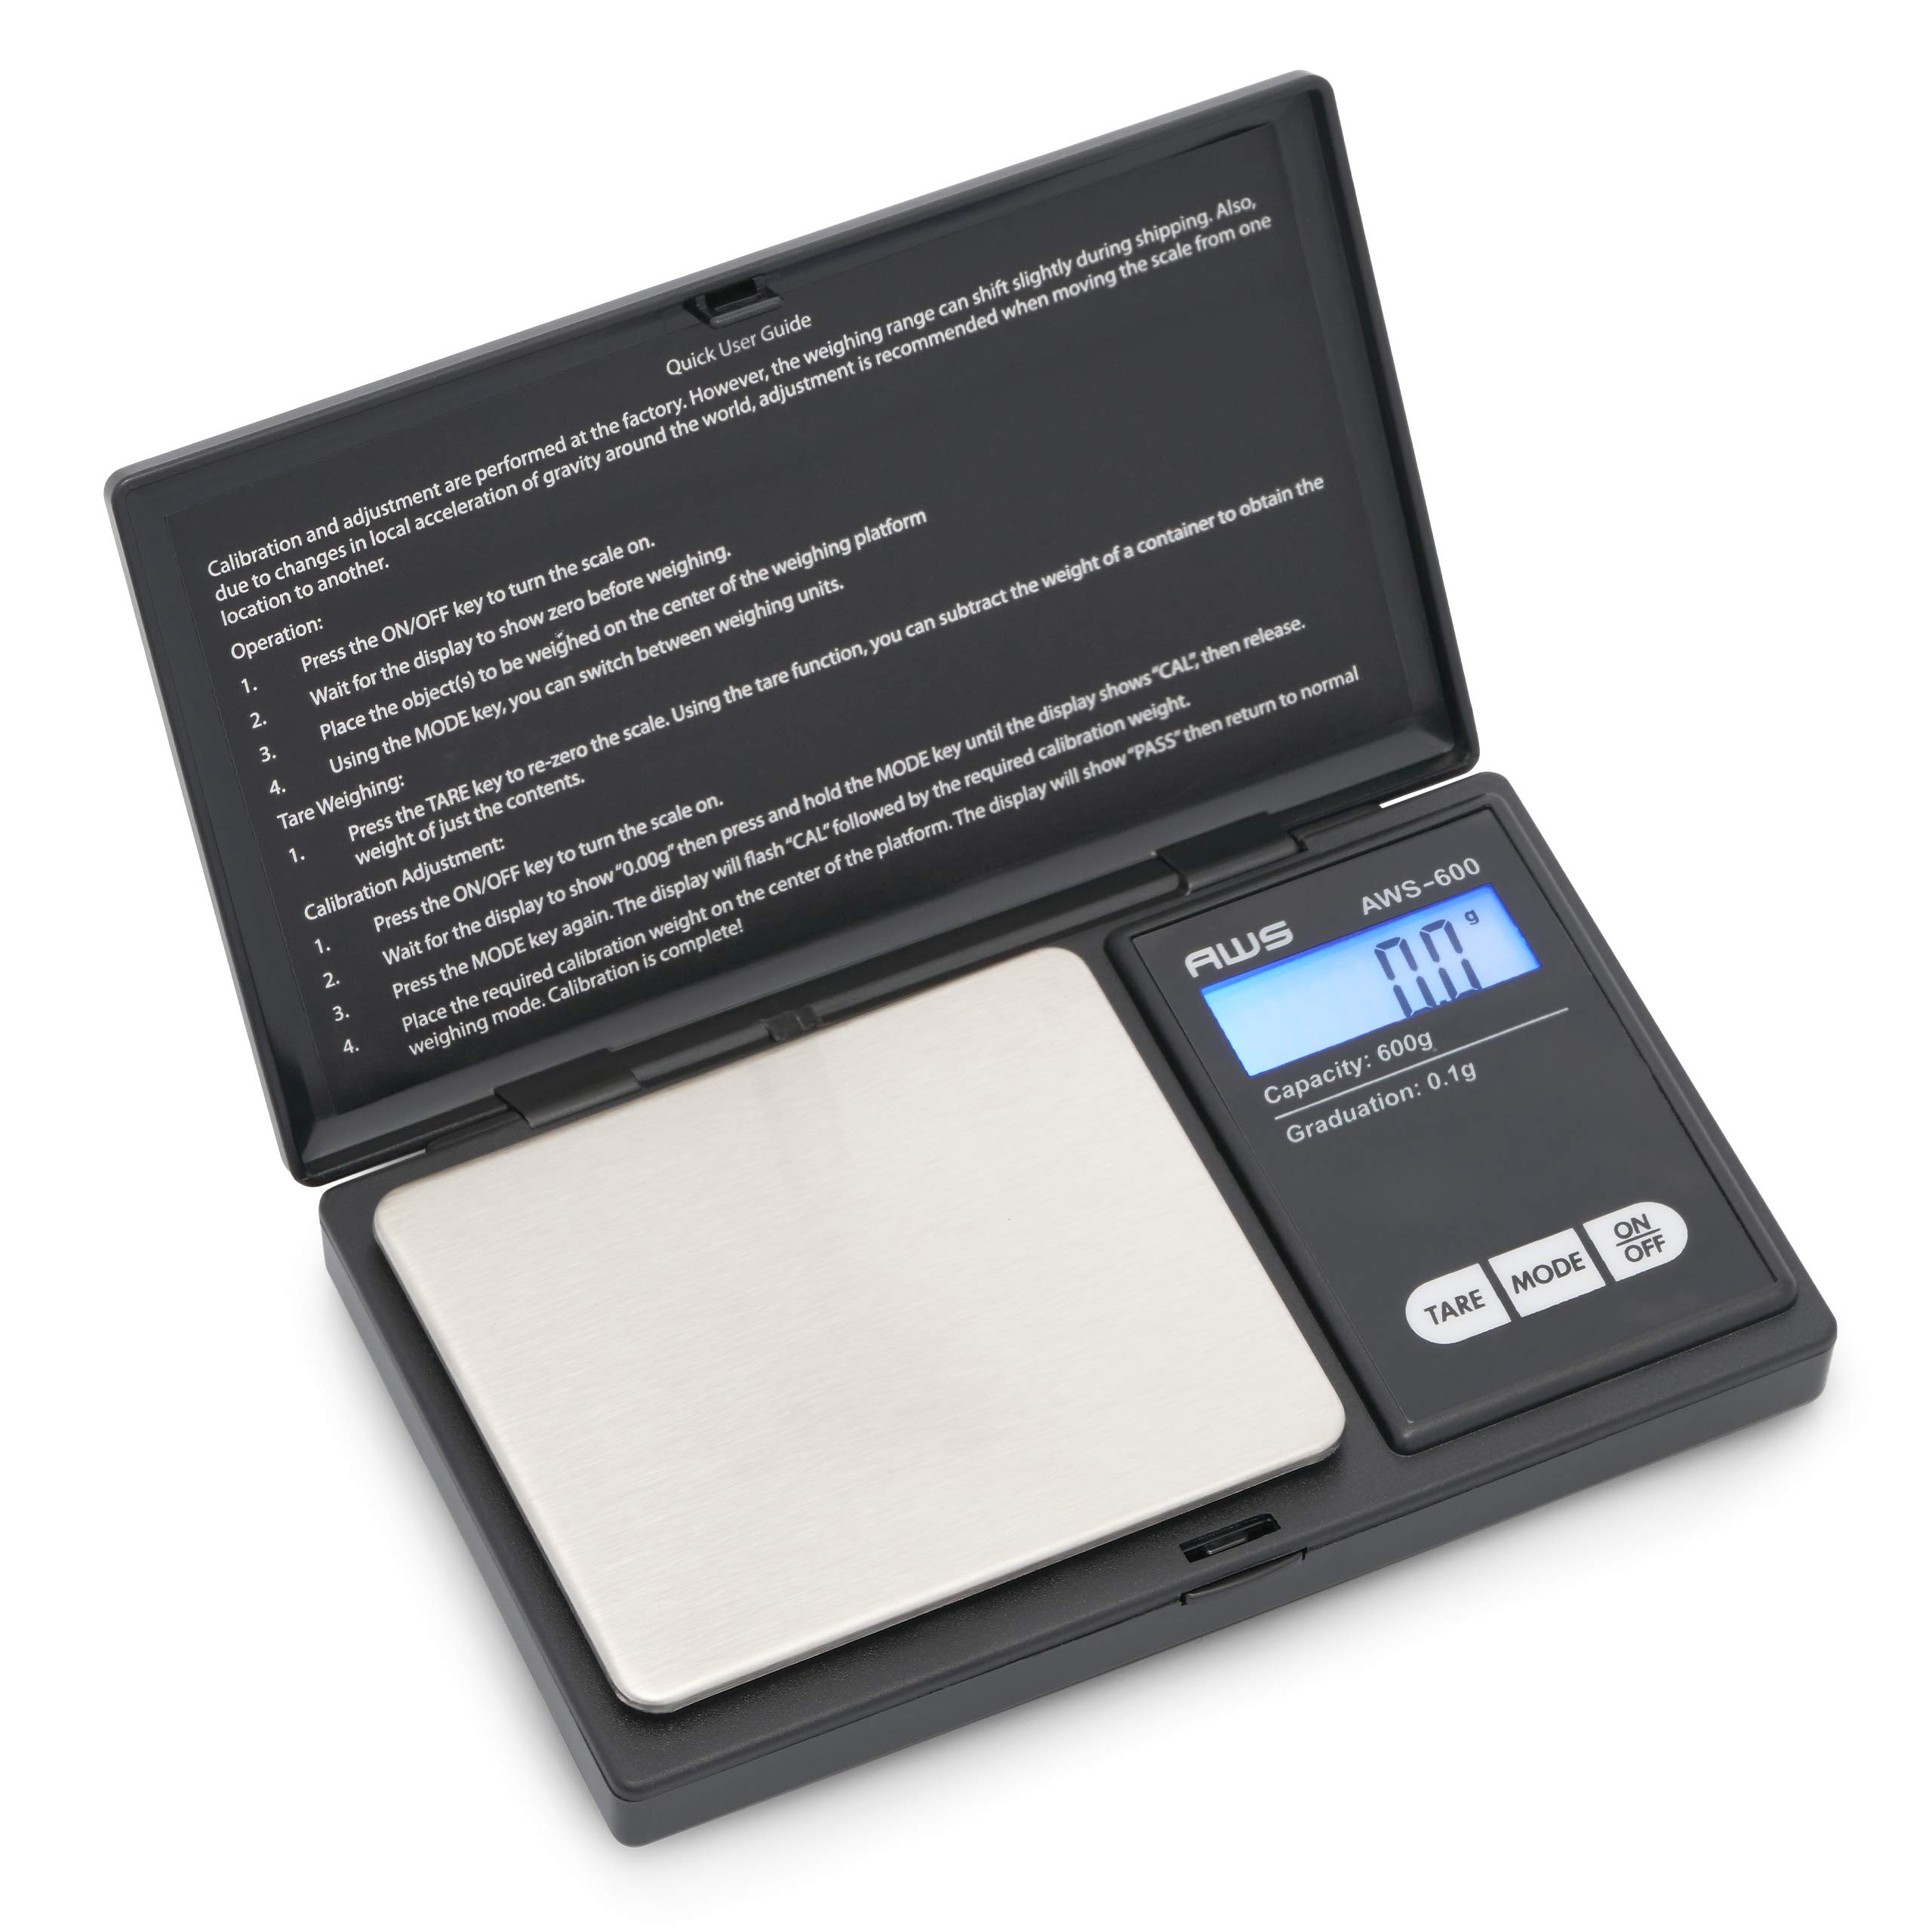 AMERICAN WEIGH SCALES Digital Pocket Weight Scale - 600 G x 0.1 G - (Black)